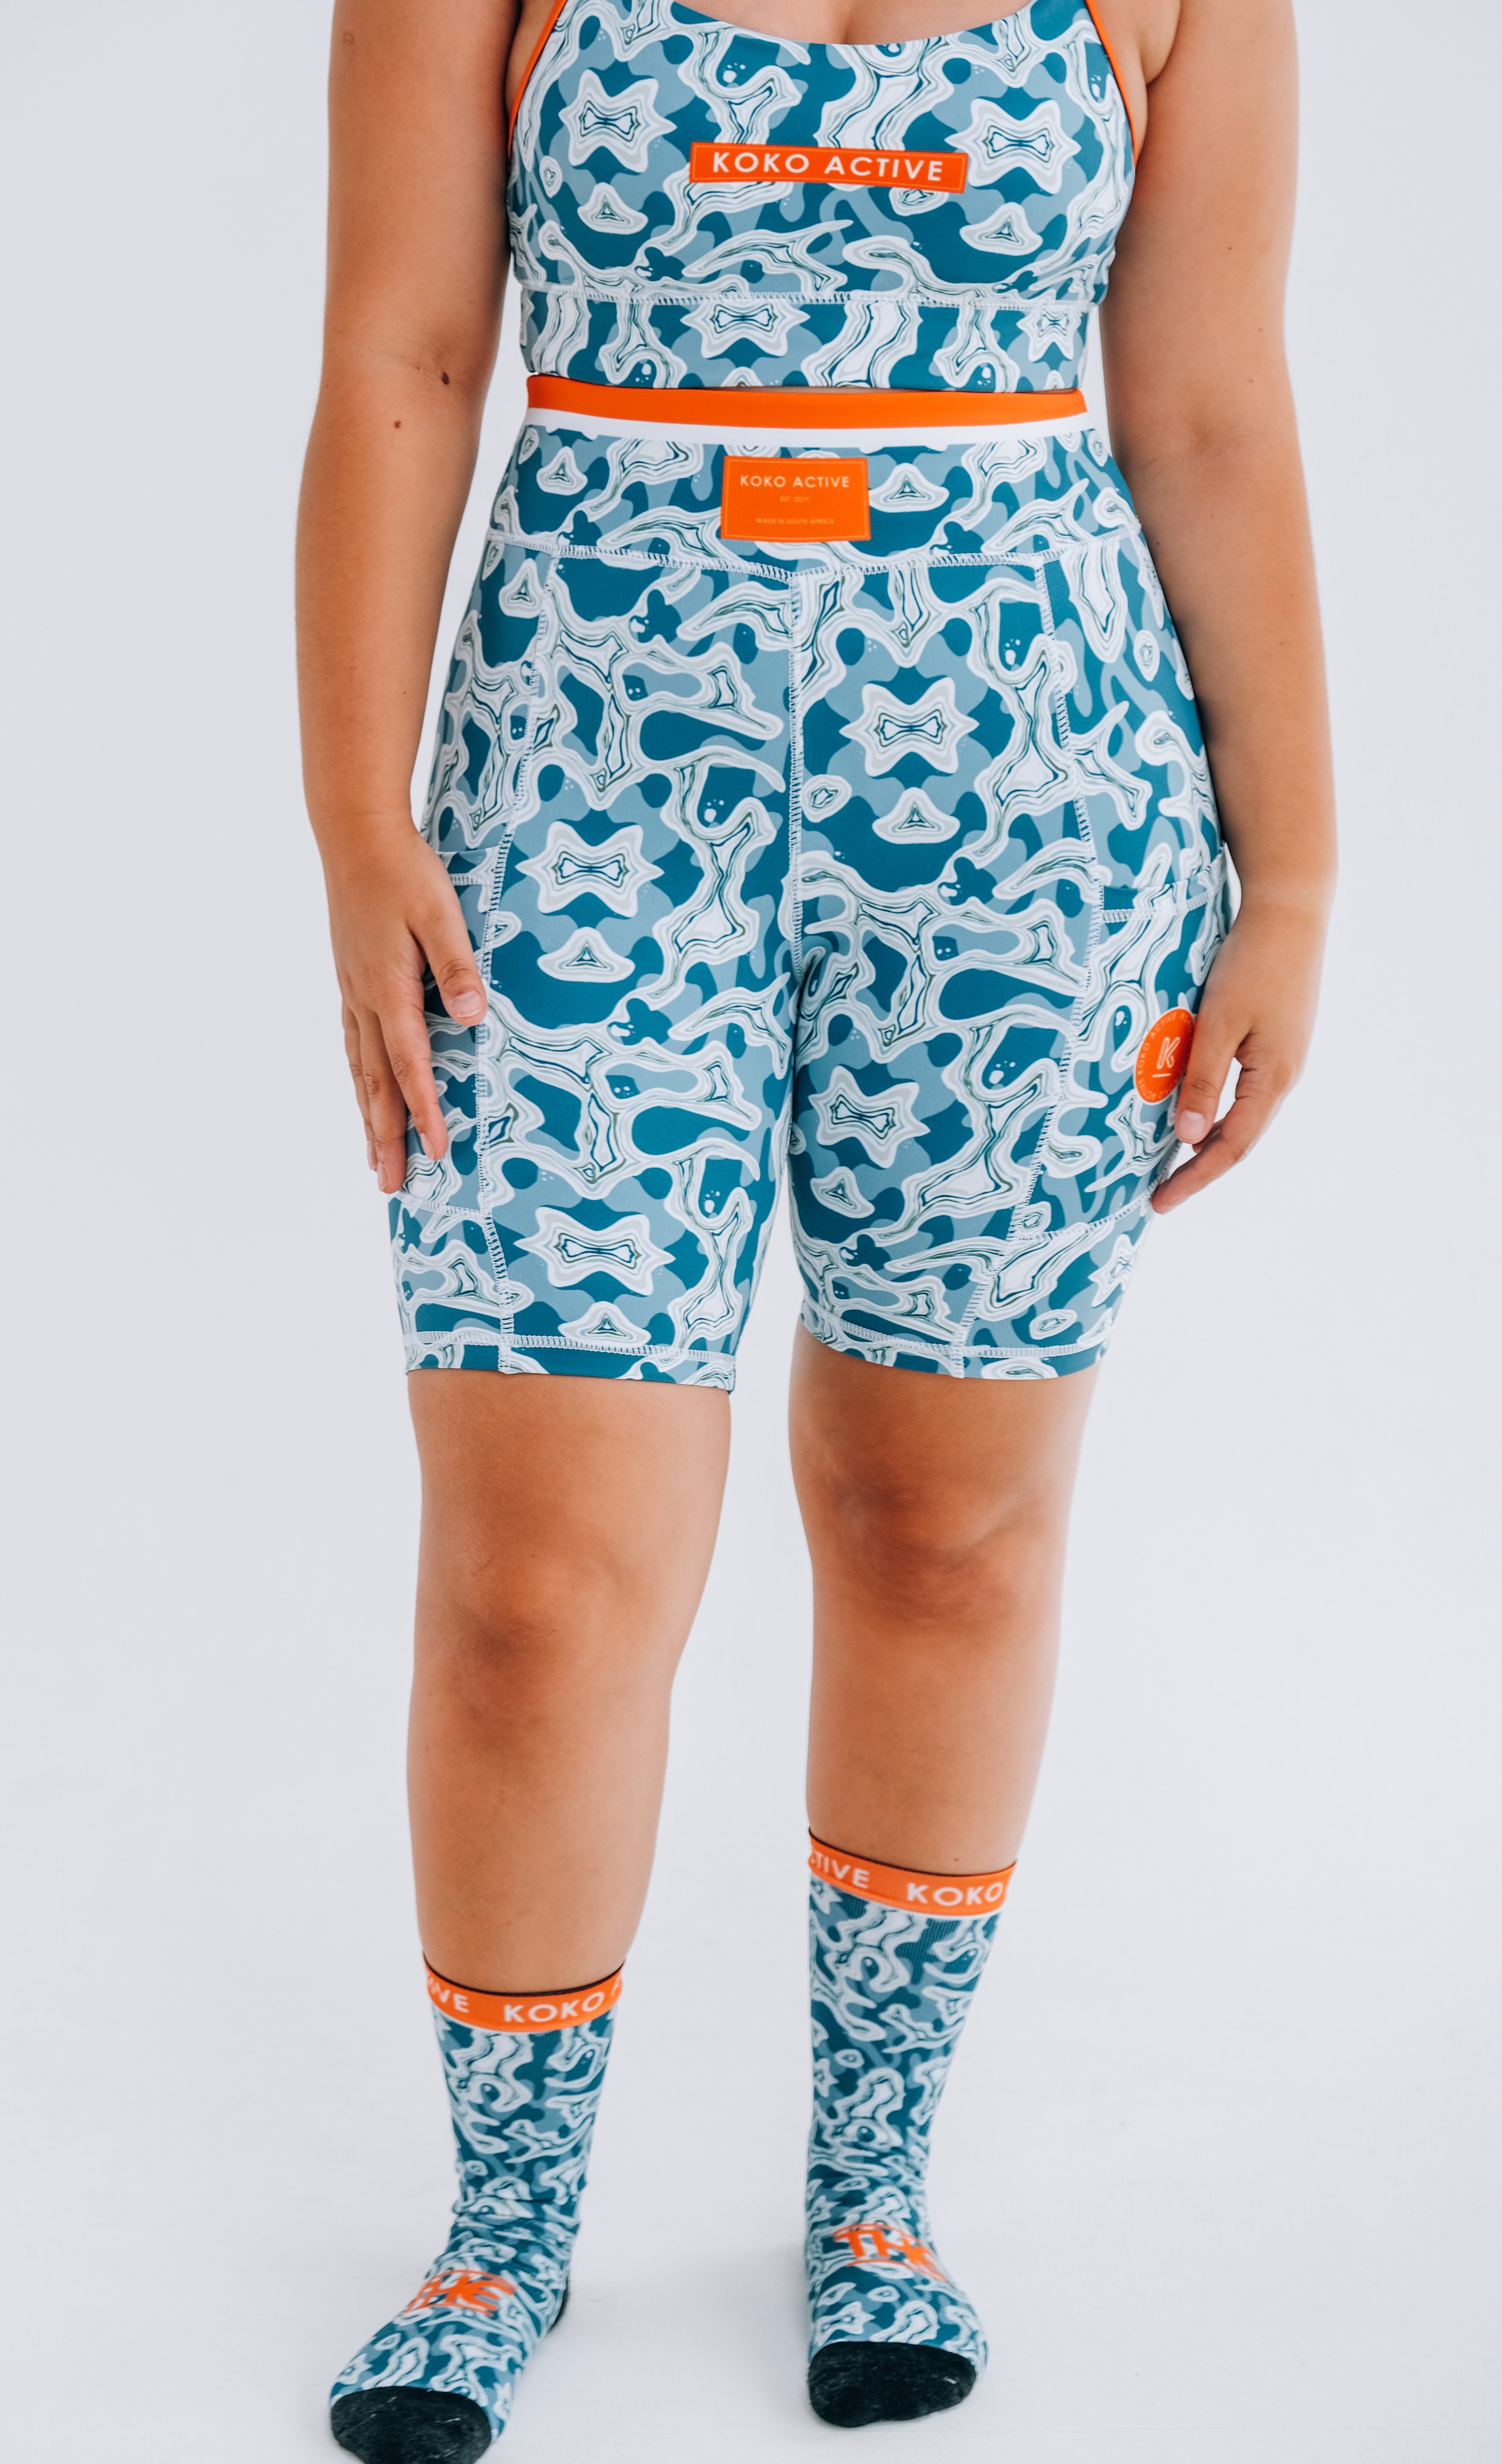 Ocean and Terrains Shorty Shorts